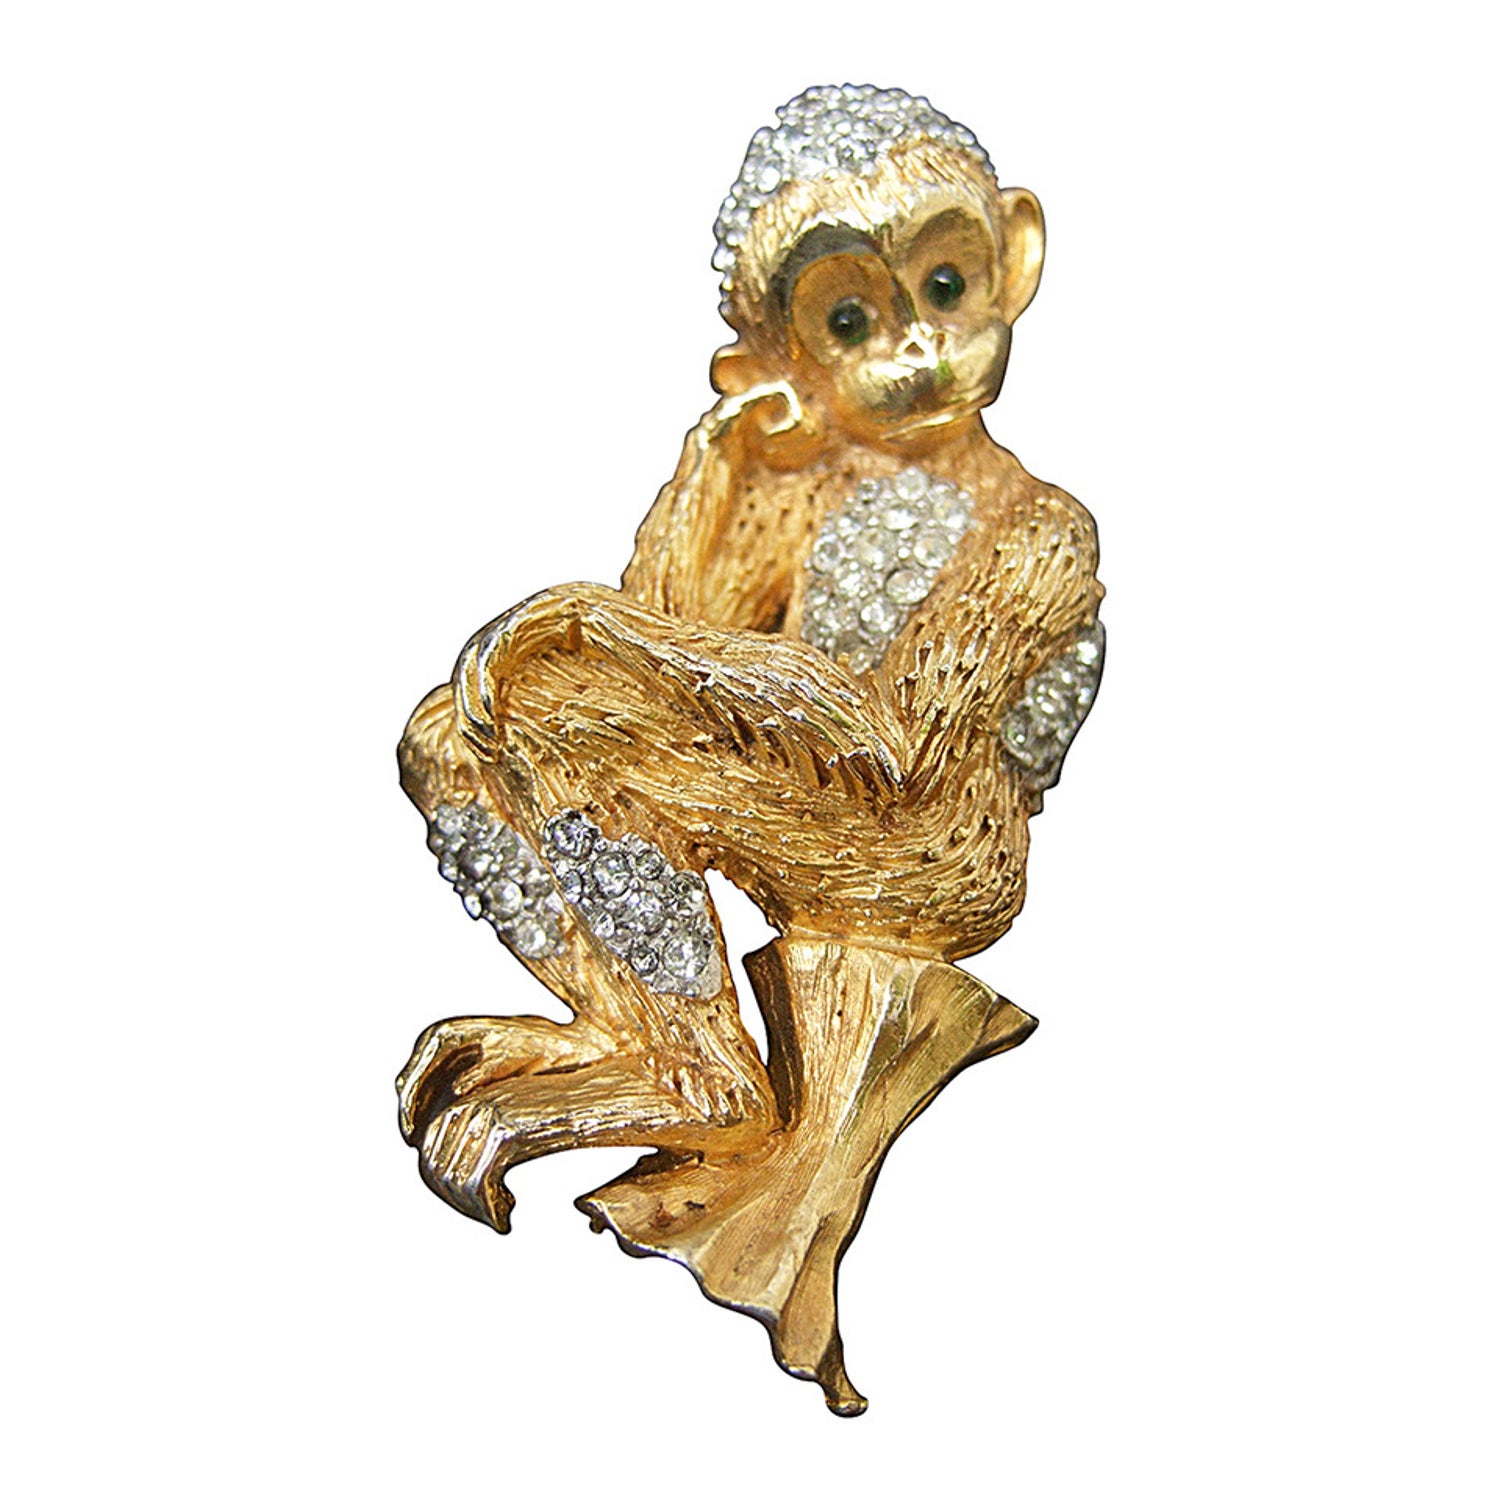 Green and White Crystal Gold Colored Metal Brooch Monkey an Branch Hanging